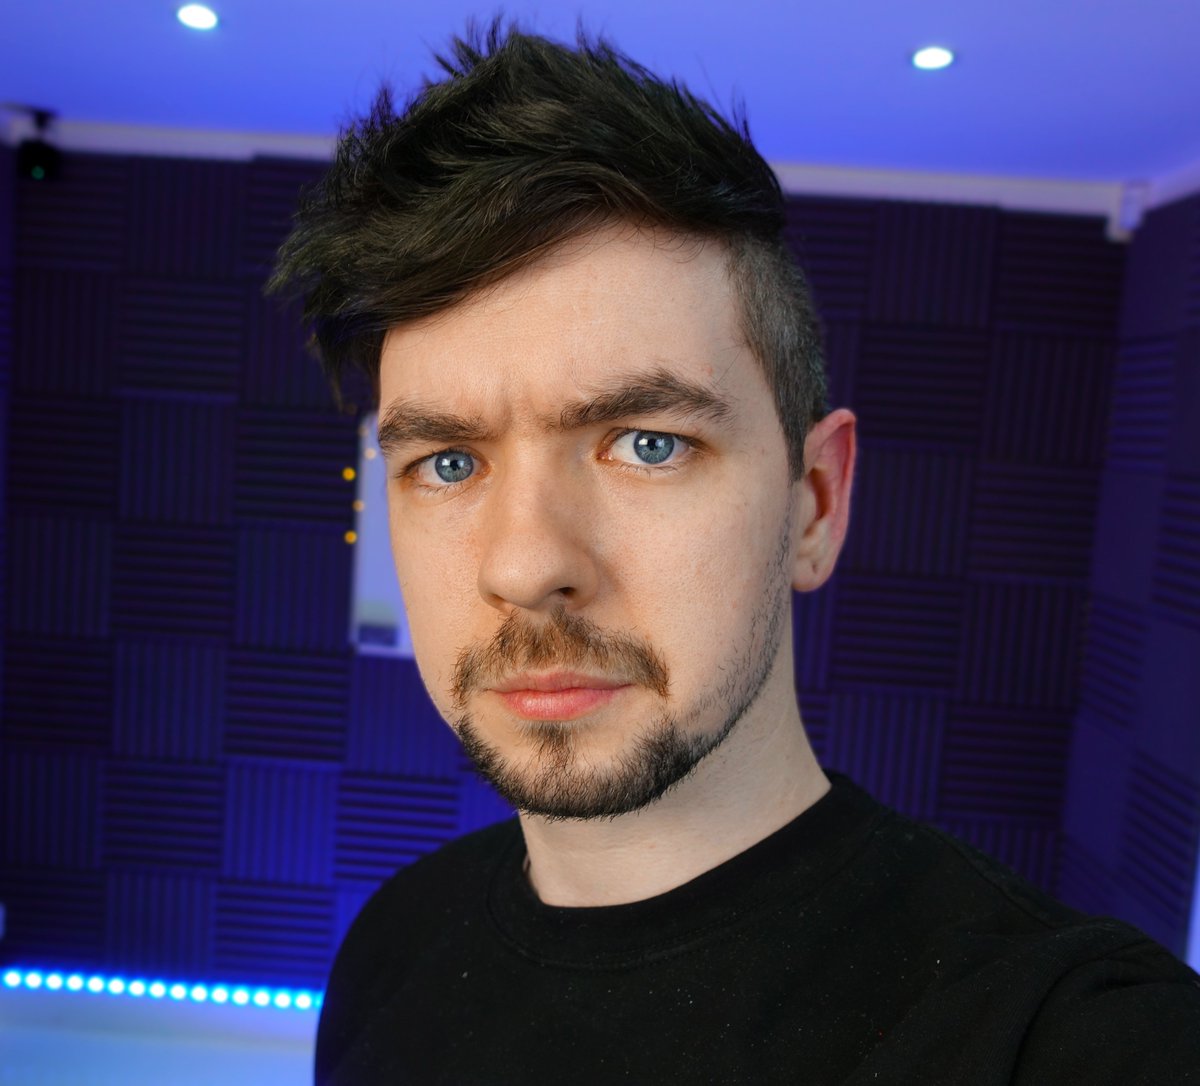 Jacksepticeye On Twitter Remember Jacksepticeye This Is Him Now